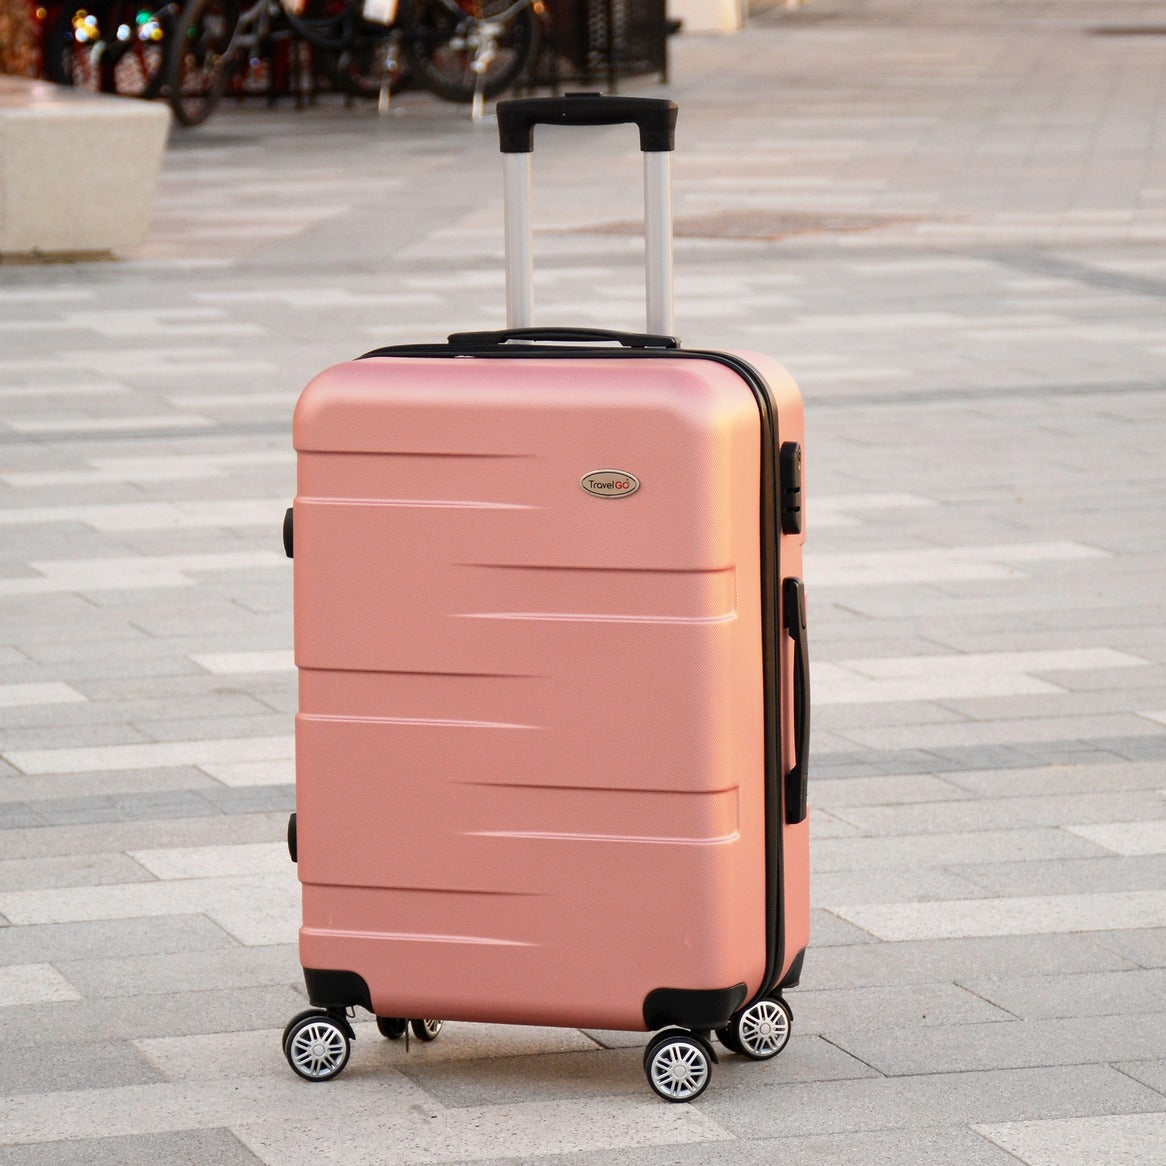 20" Rose Gold Colour JIAN ABS 559 Luggage Lightweight Hard Case Carry On Trolley Bag with Spinner Wheel